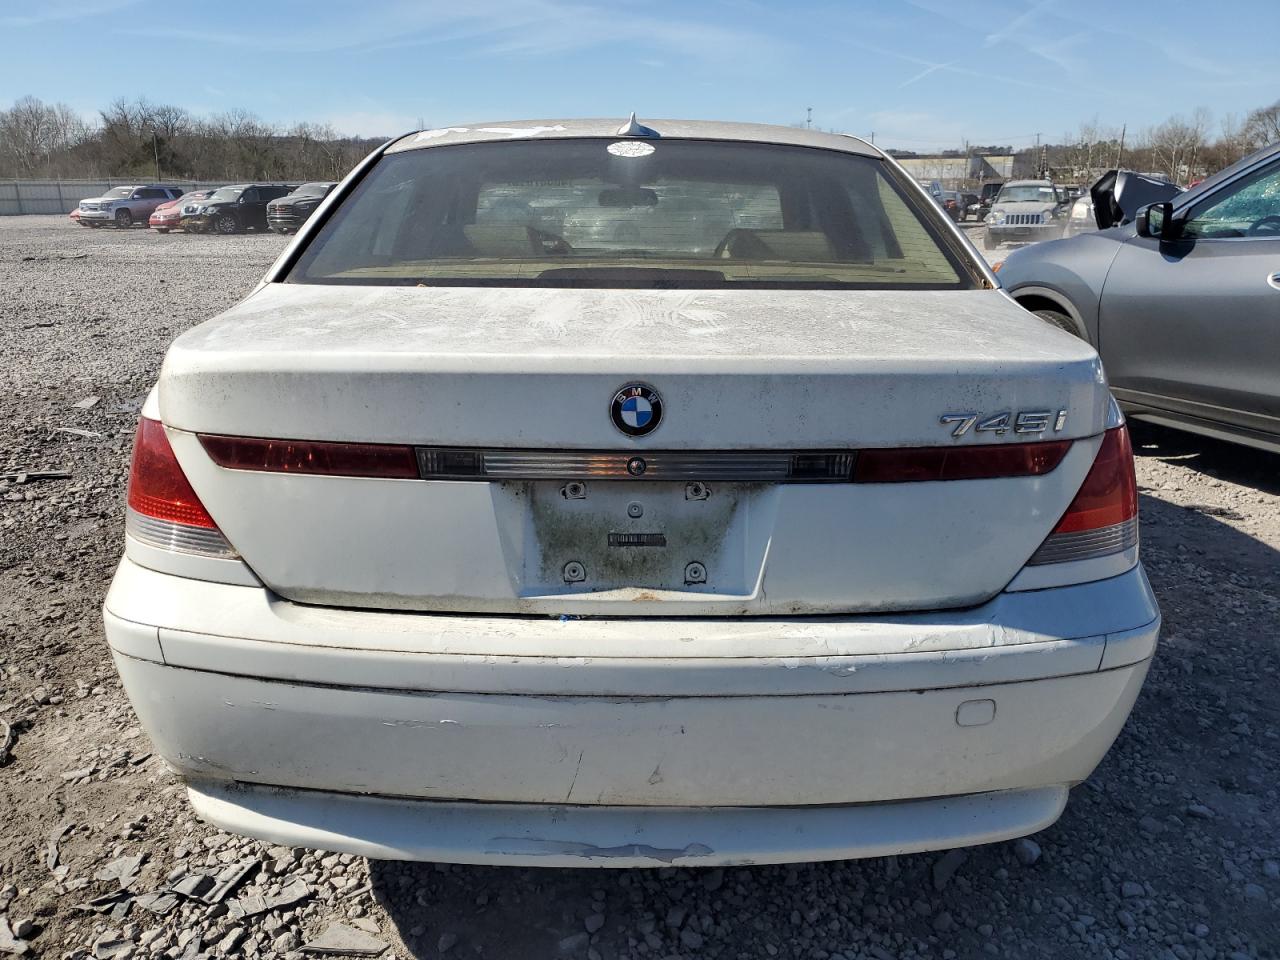 WBAGL63462D****** Salvage and Repairable 2002 BMW 7 Series in Alabama State